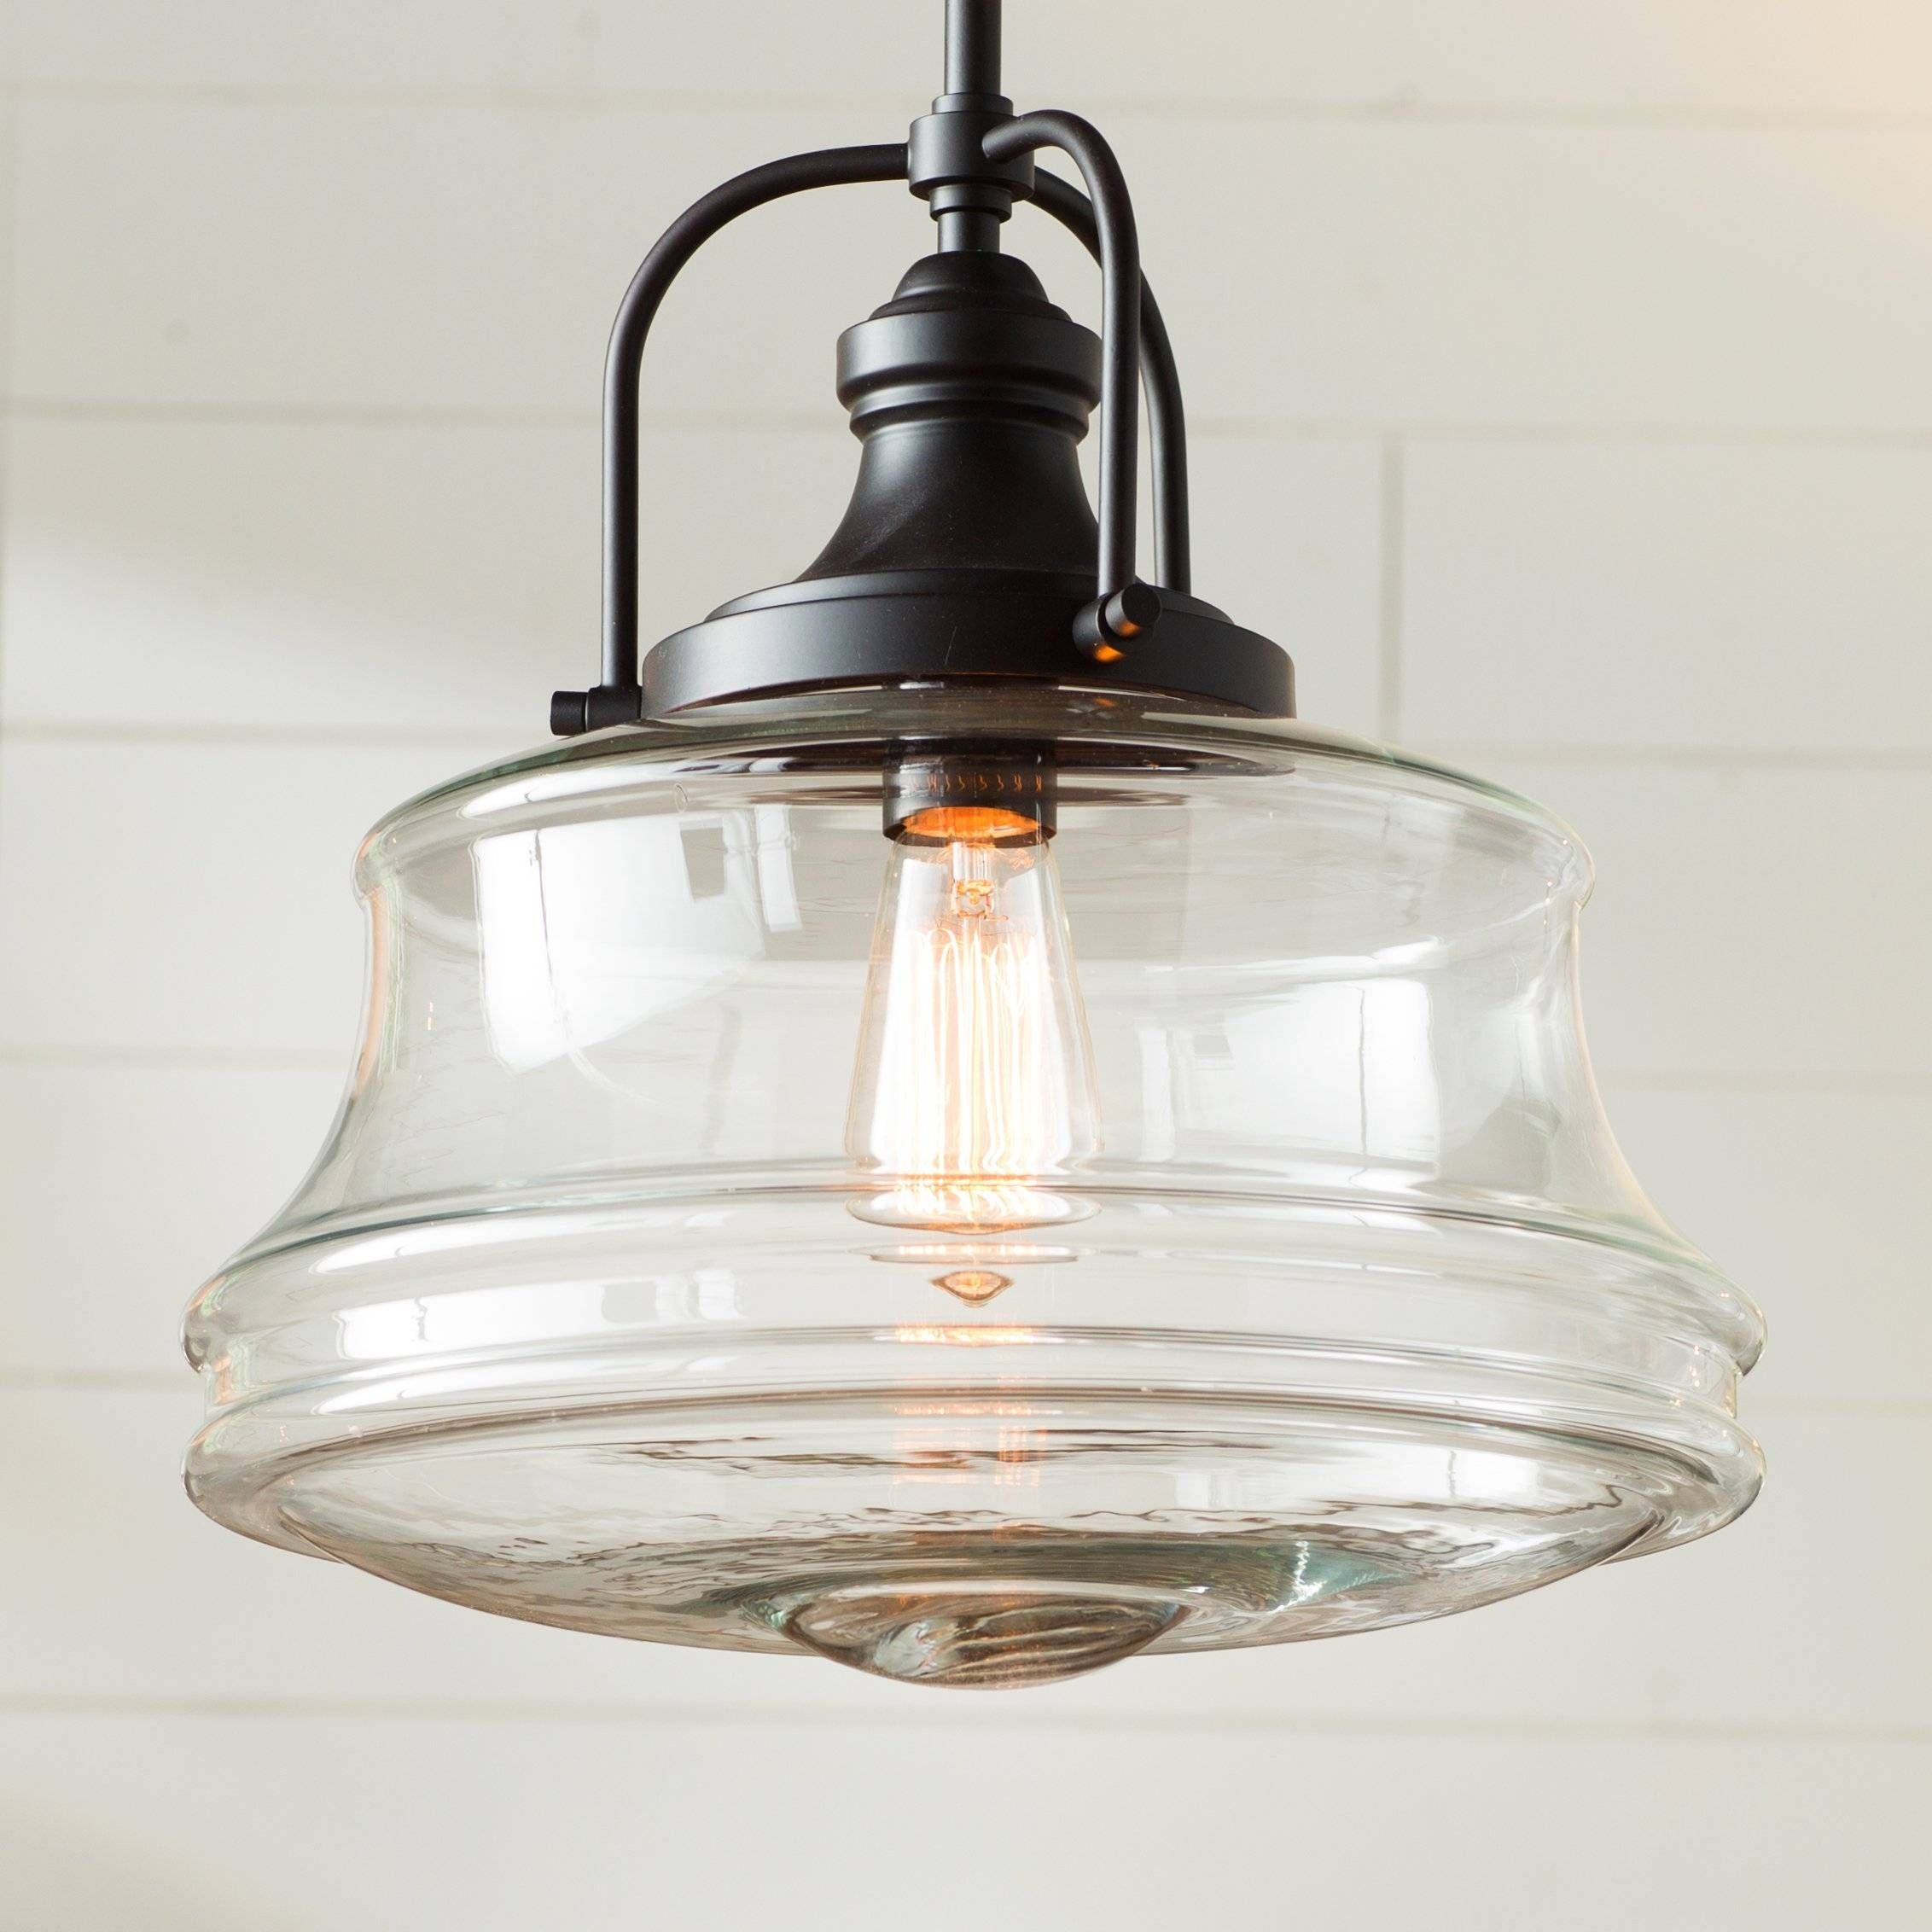 Decor: Clear Glass Schoolhouse Pendant Light For Lighting Fixture With Regard To Large Schoolhouse Pendant Lights (View 11 of 15)